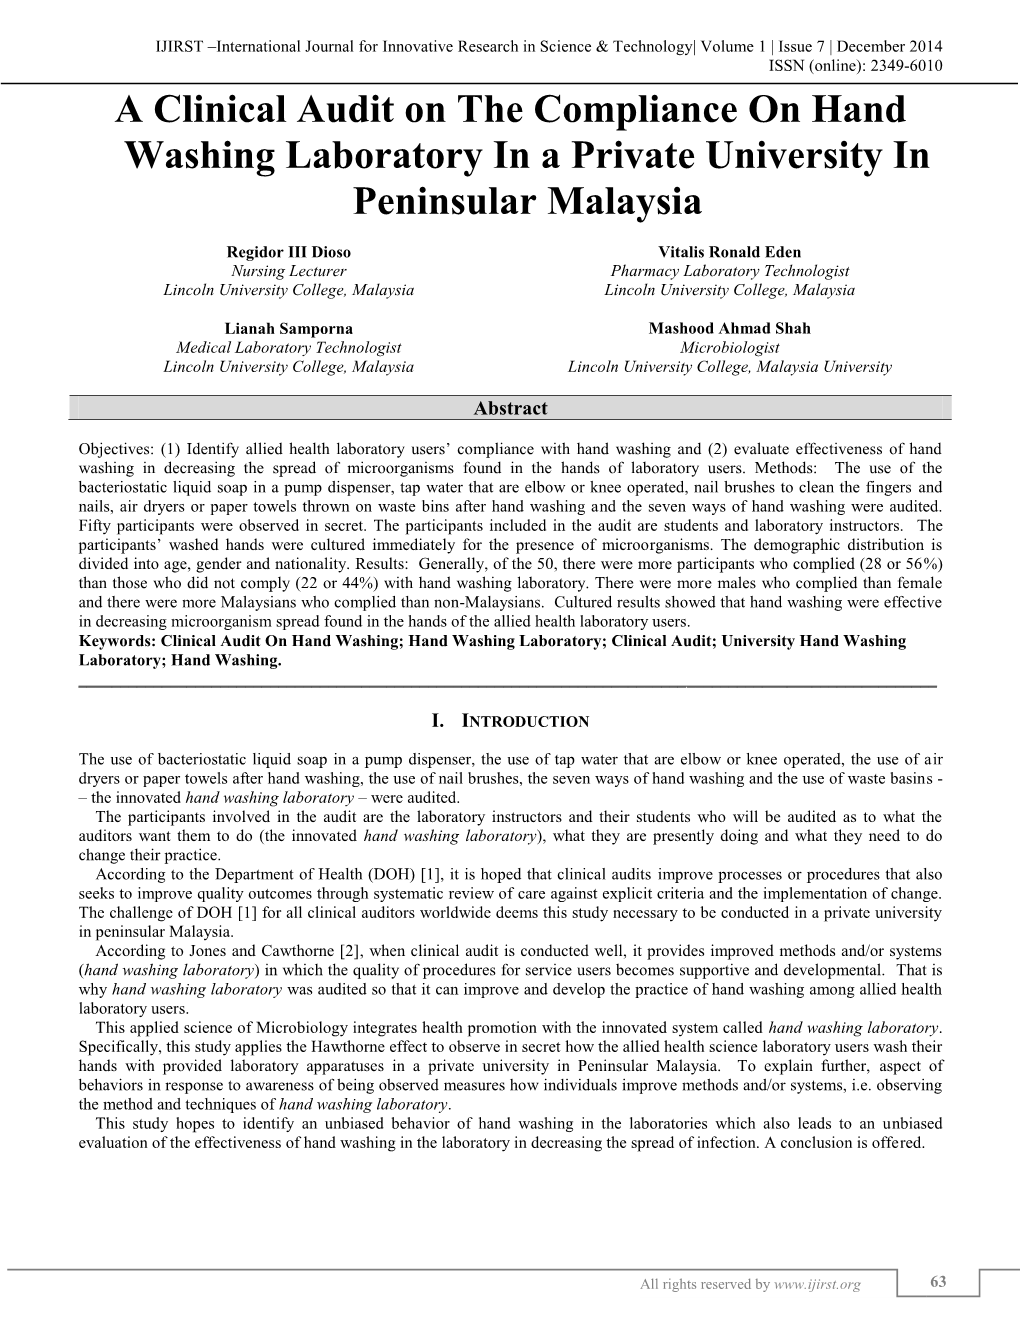 A Clinical Audit on the Compliance on Hand Washing Laboratory in a Private University In